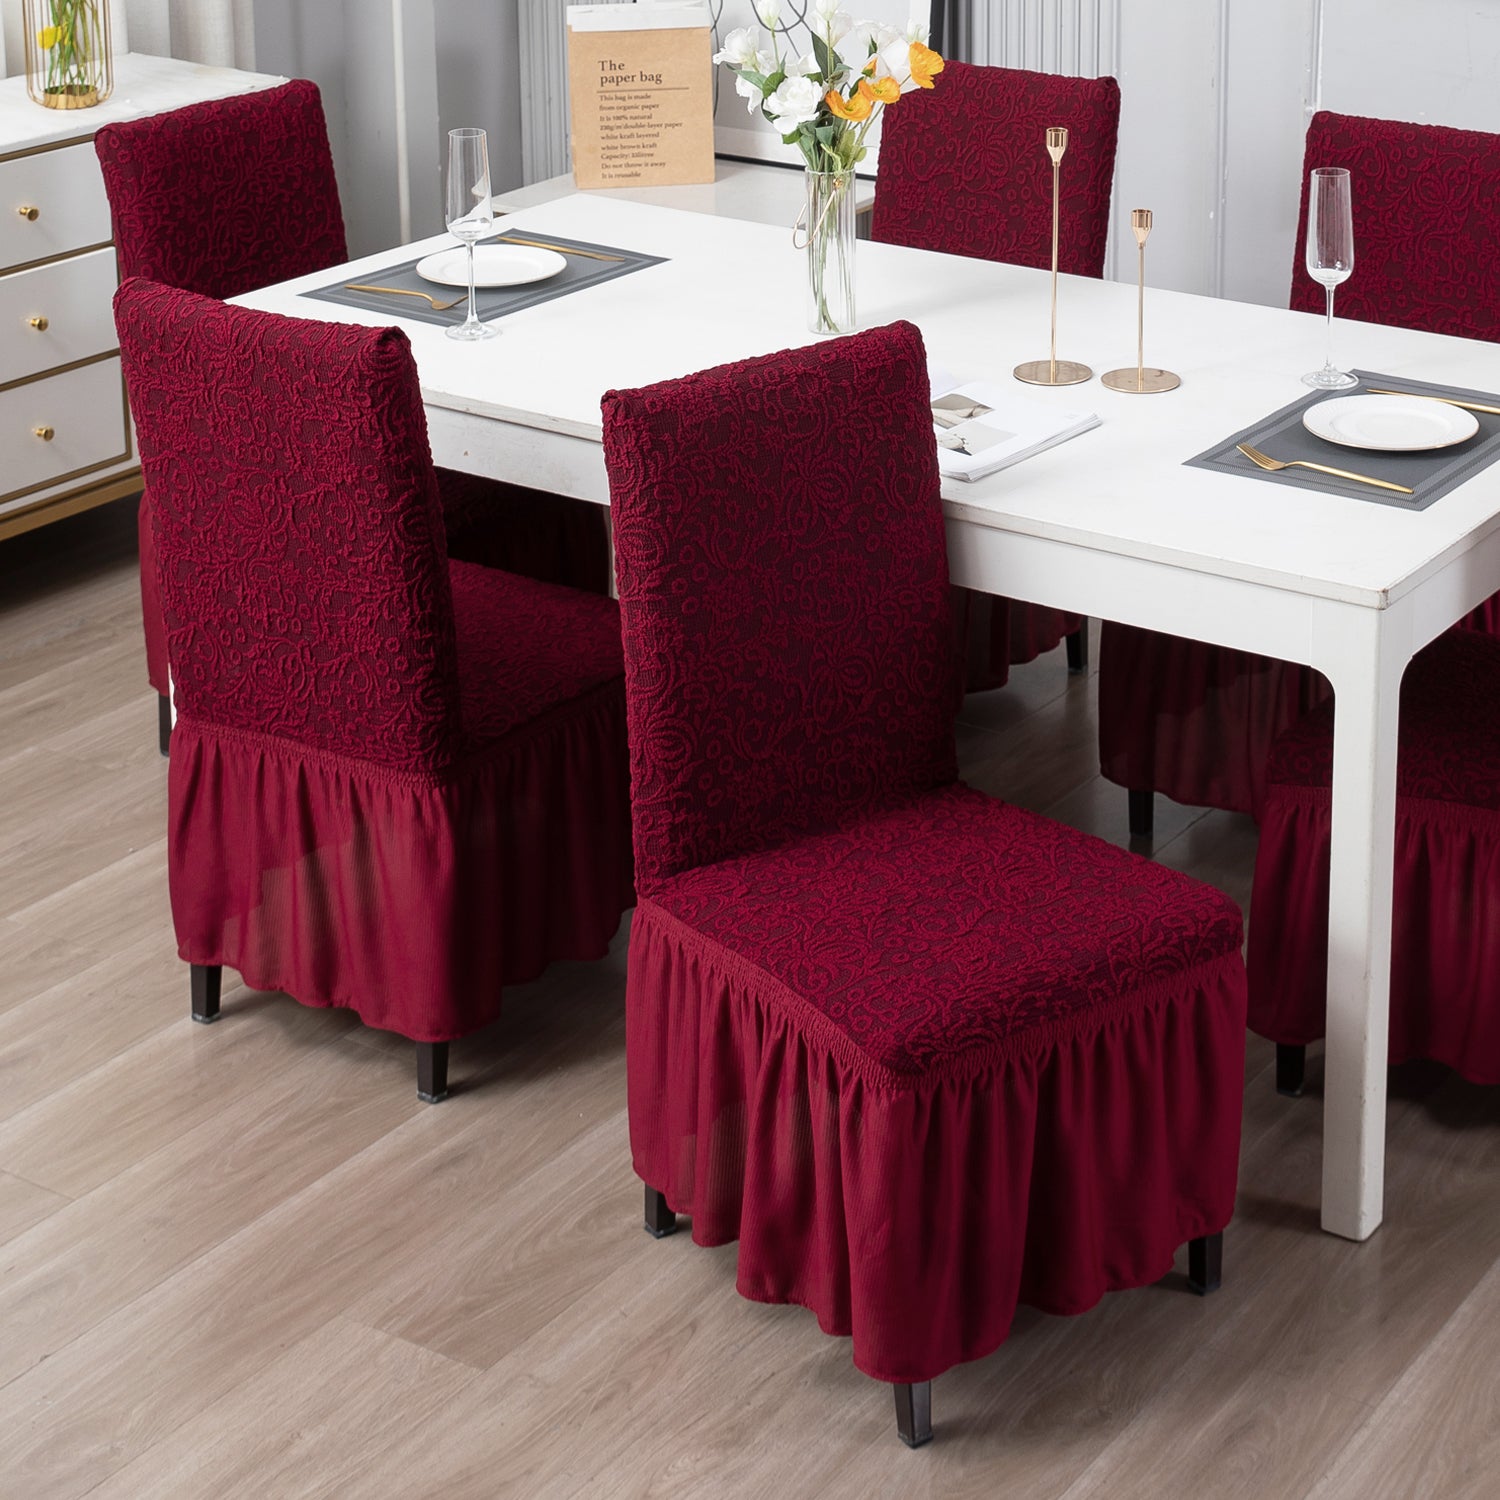 Elastic Stretchable Designer Woven Jacquard Dining Chair Cover with Frill, Wine Red